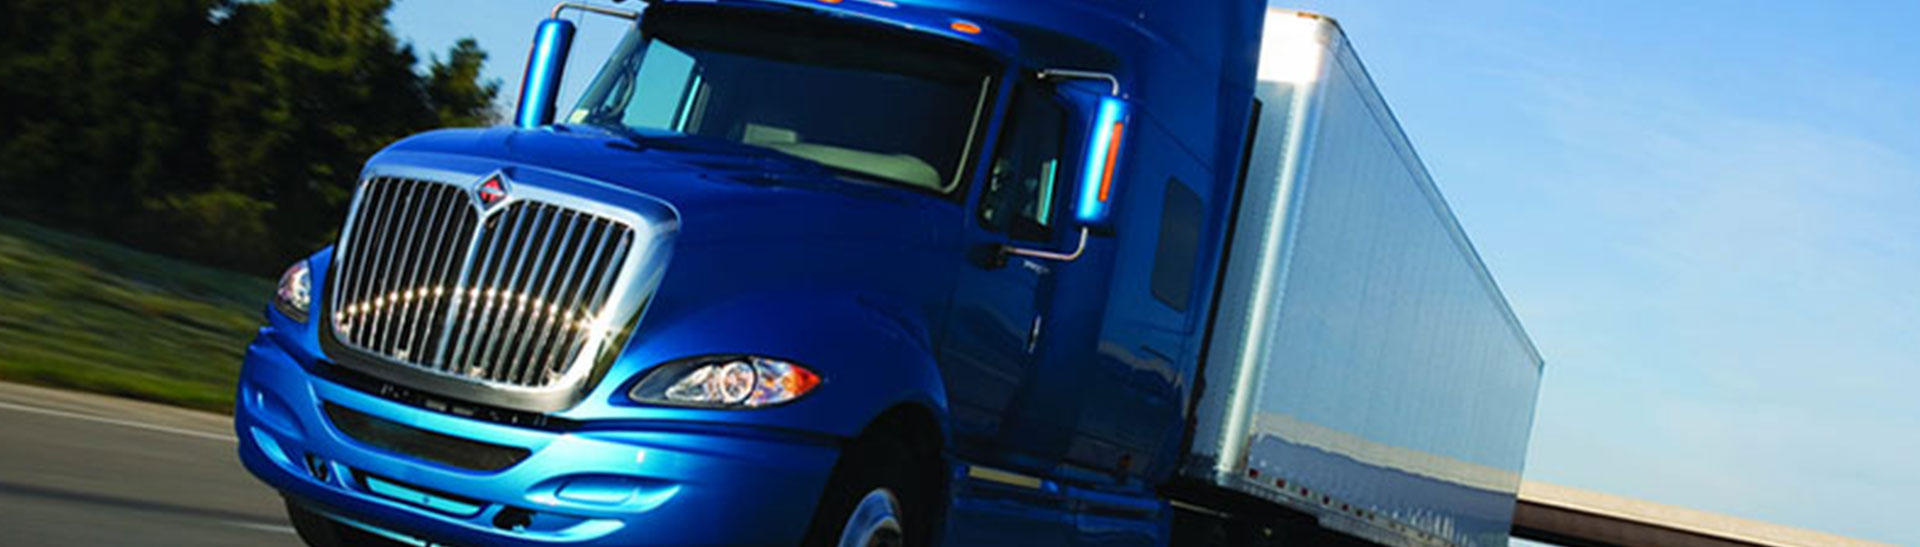 Oak Park Trucking Services, Logistics Services and Trucking Company